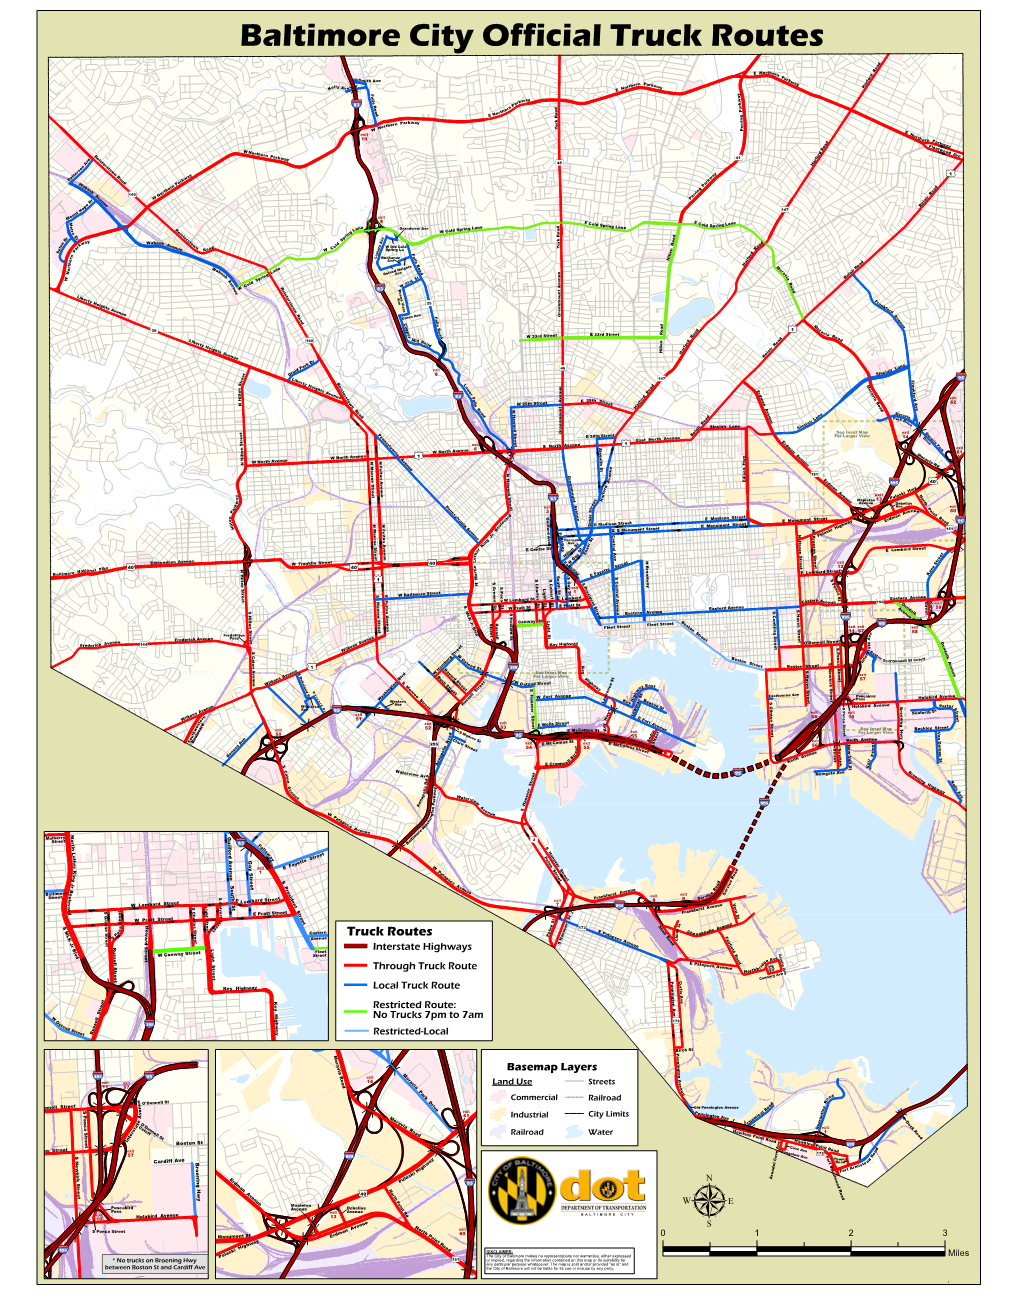 Baltimore City Official Truck Routes